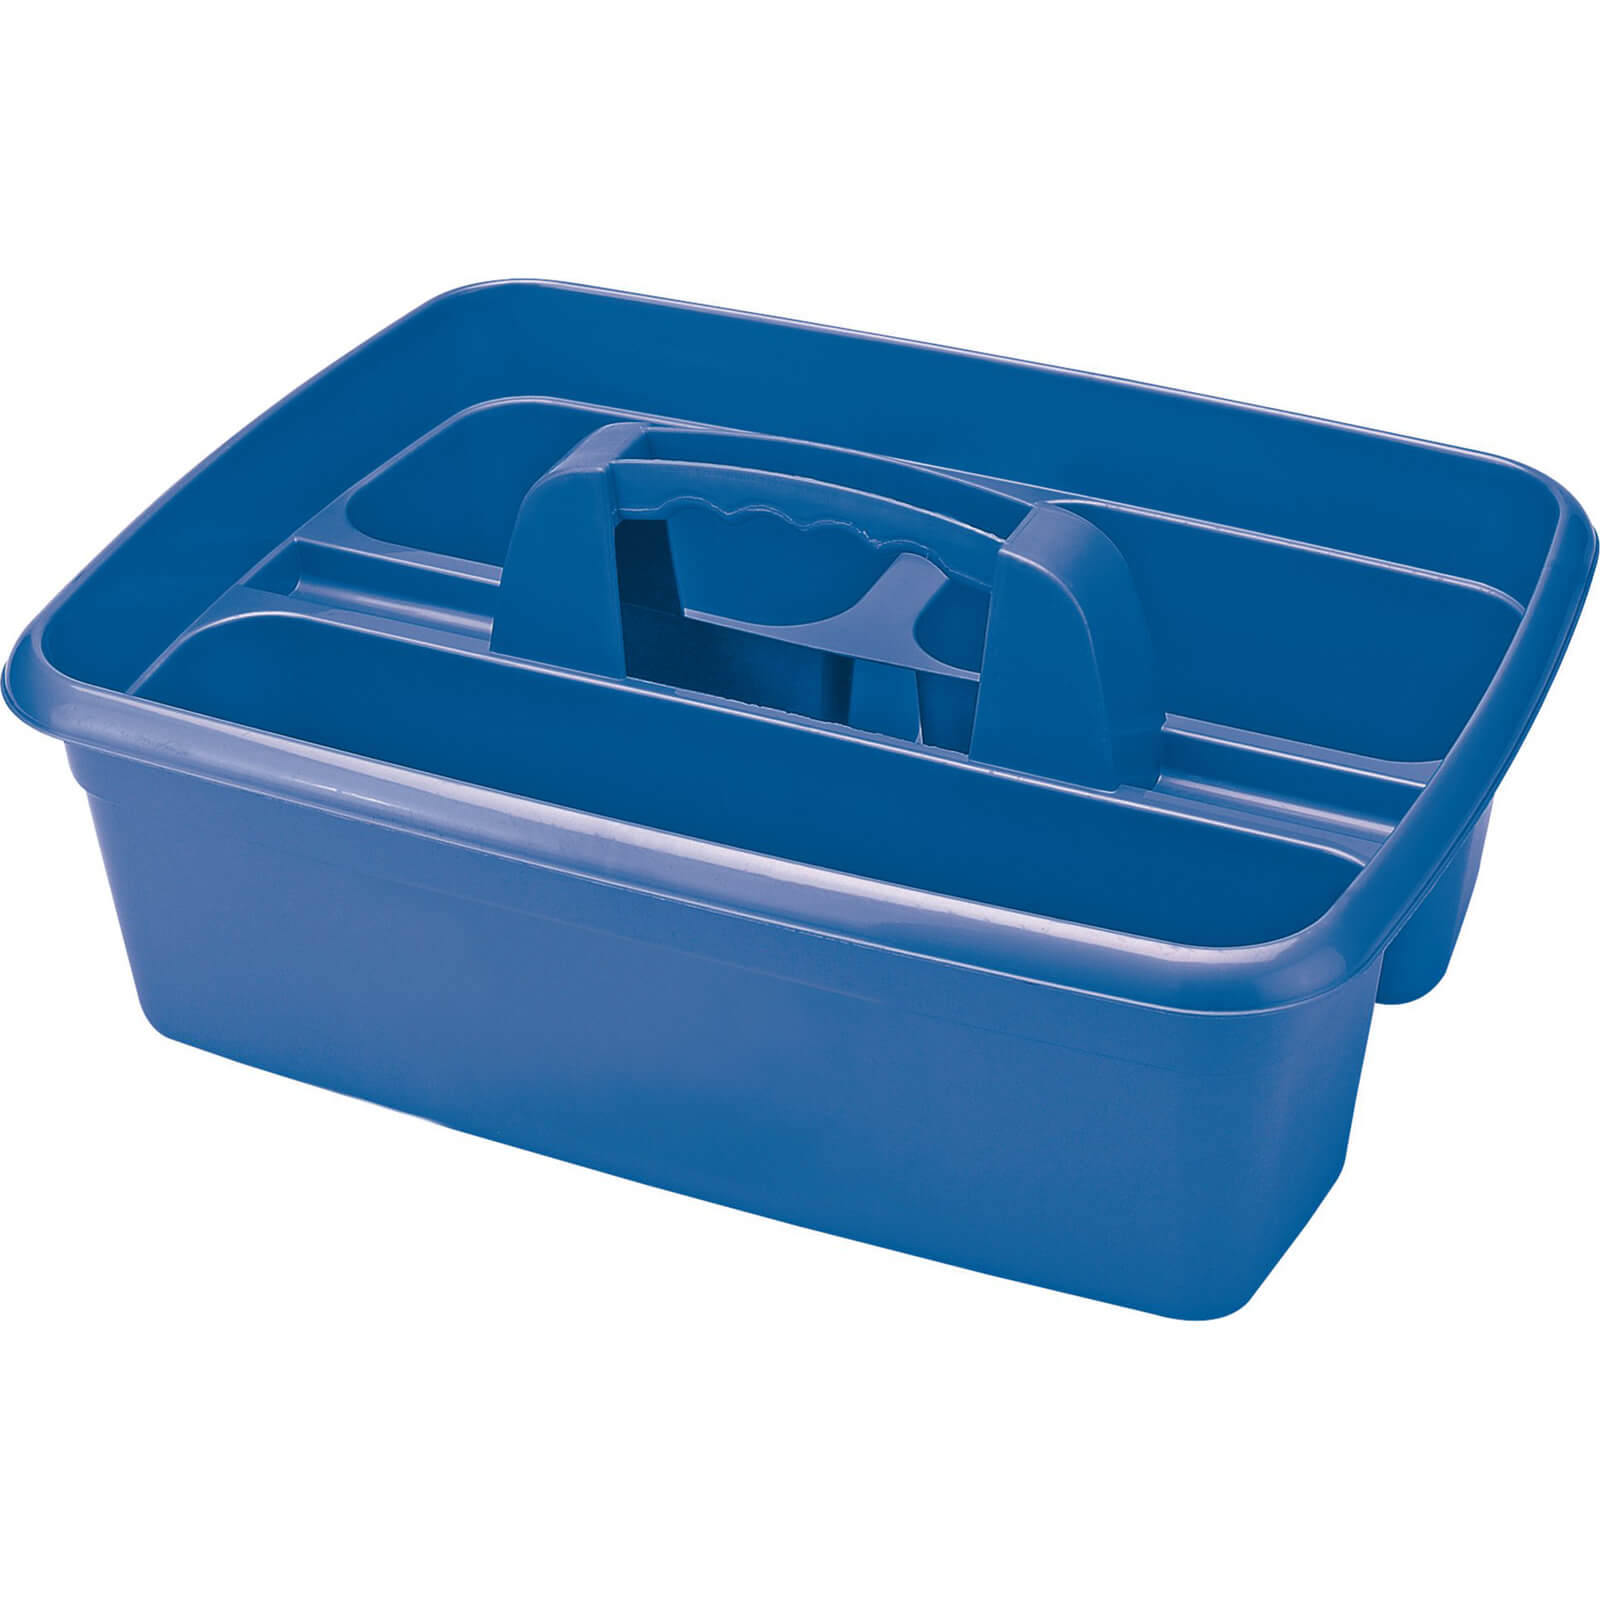 Photo of Draper 3 Compartment Tool Storage Tote Tray / Cleaning Caddy